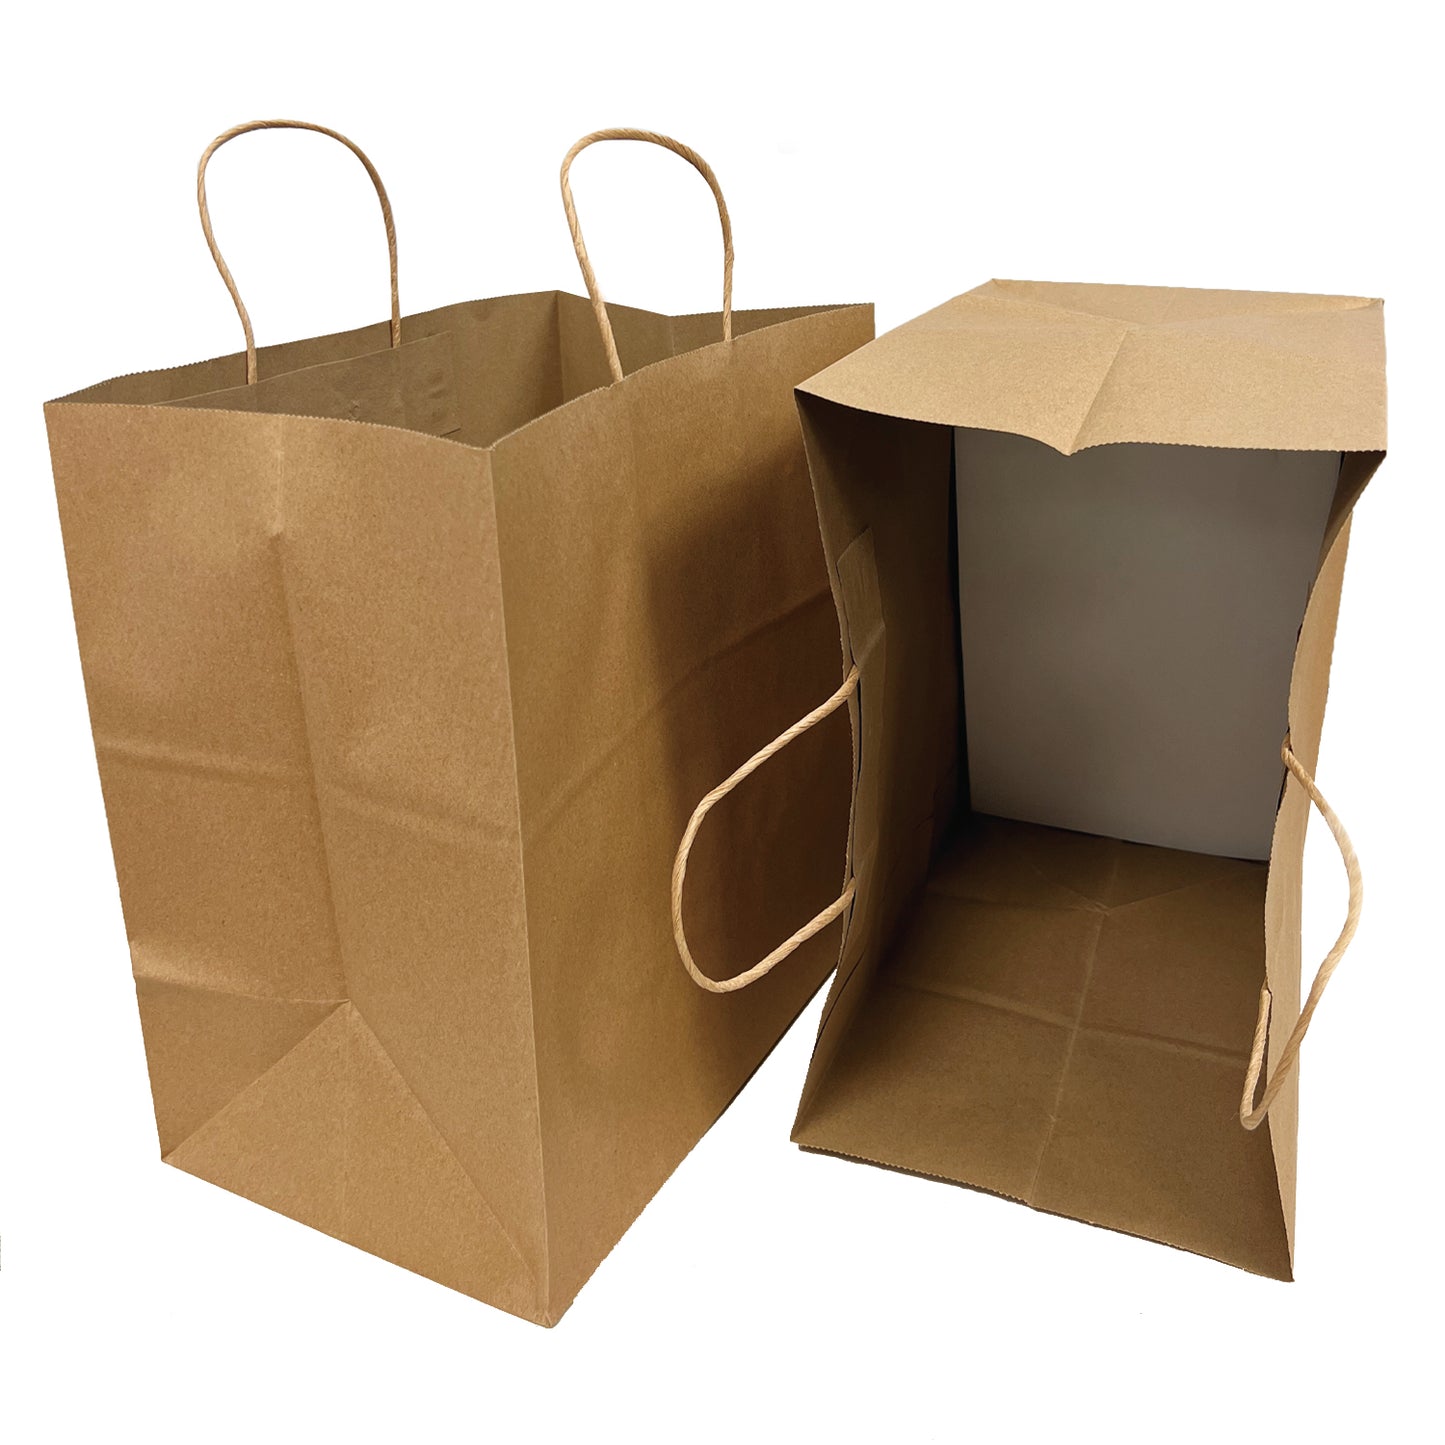 200pcs Restaurant 13x8x13 inches Kraft Paper Bag Cardboard Insert with Twisted Handles, $0.55/pc